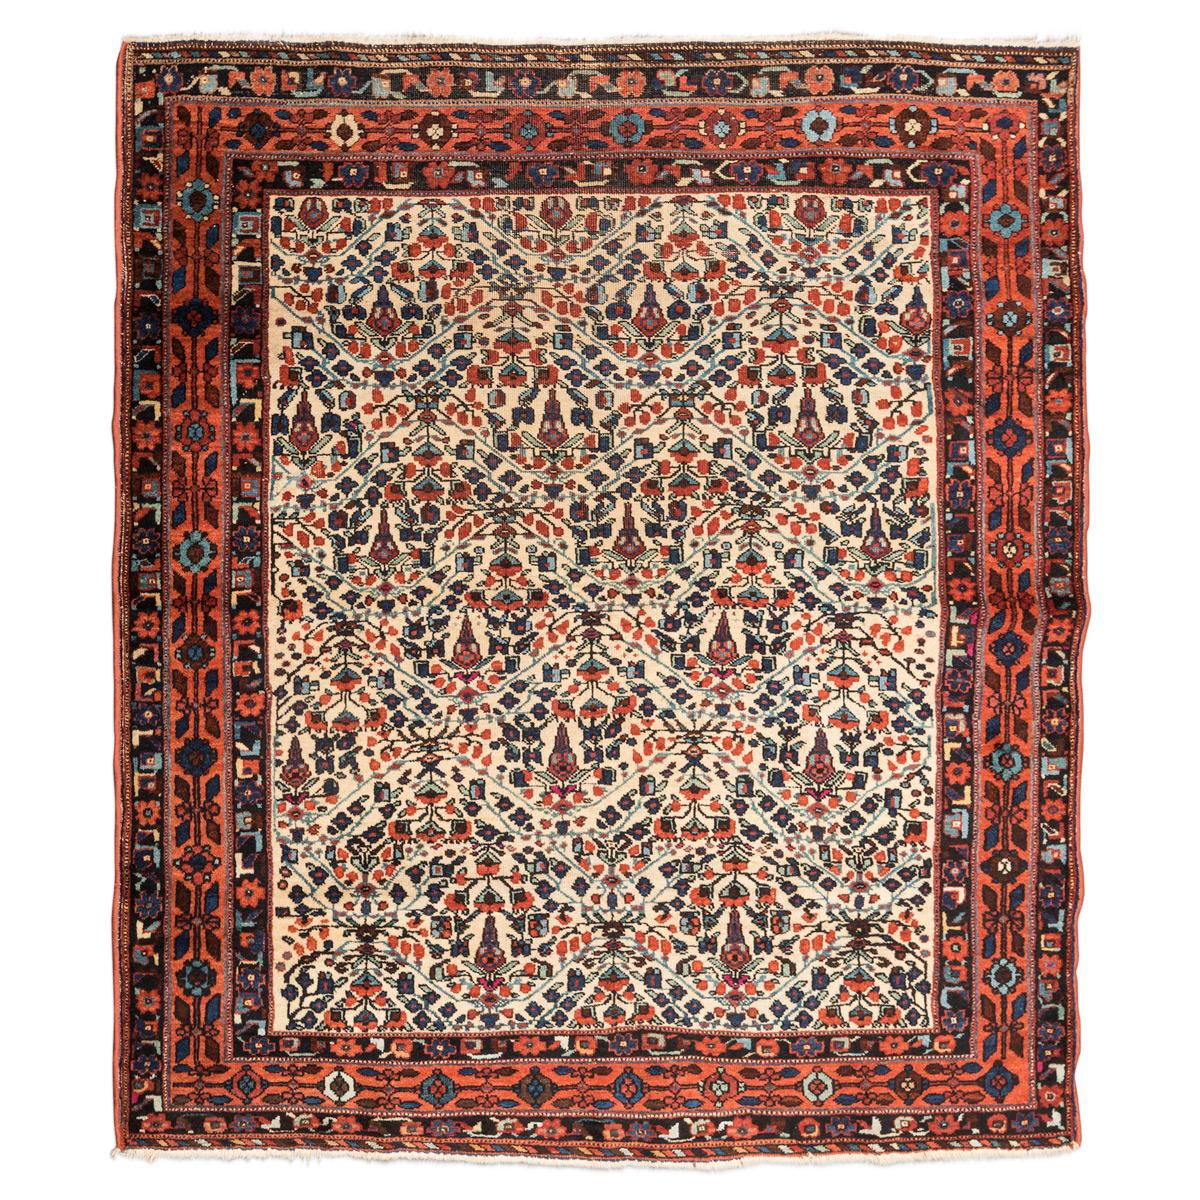 20th Century, Afshar Rug, Flowers Design over Central Field, circa 1930 Afshar Design rug of ancient origin nomadic.
- Elaborated with leaves and flowers design by the central field.
- Its border very worked with curvilinear elements with orange and